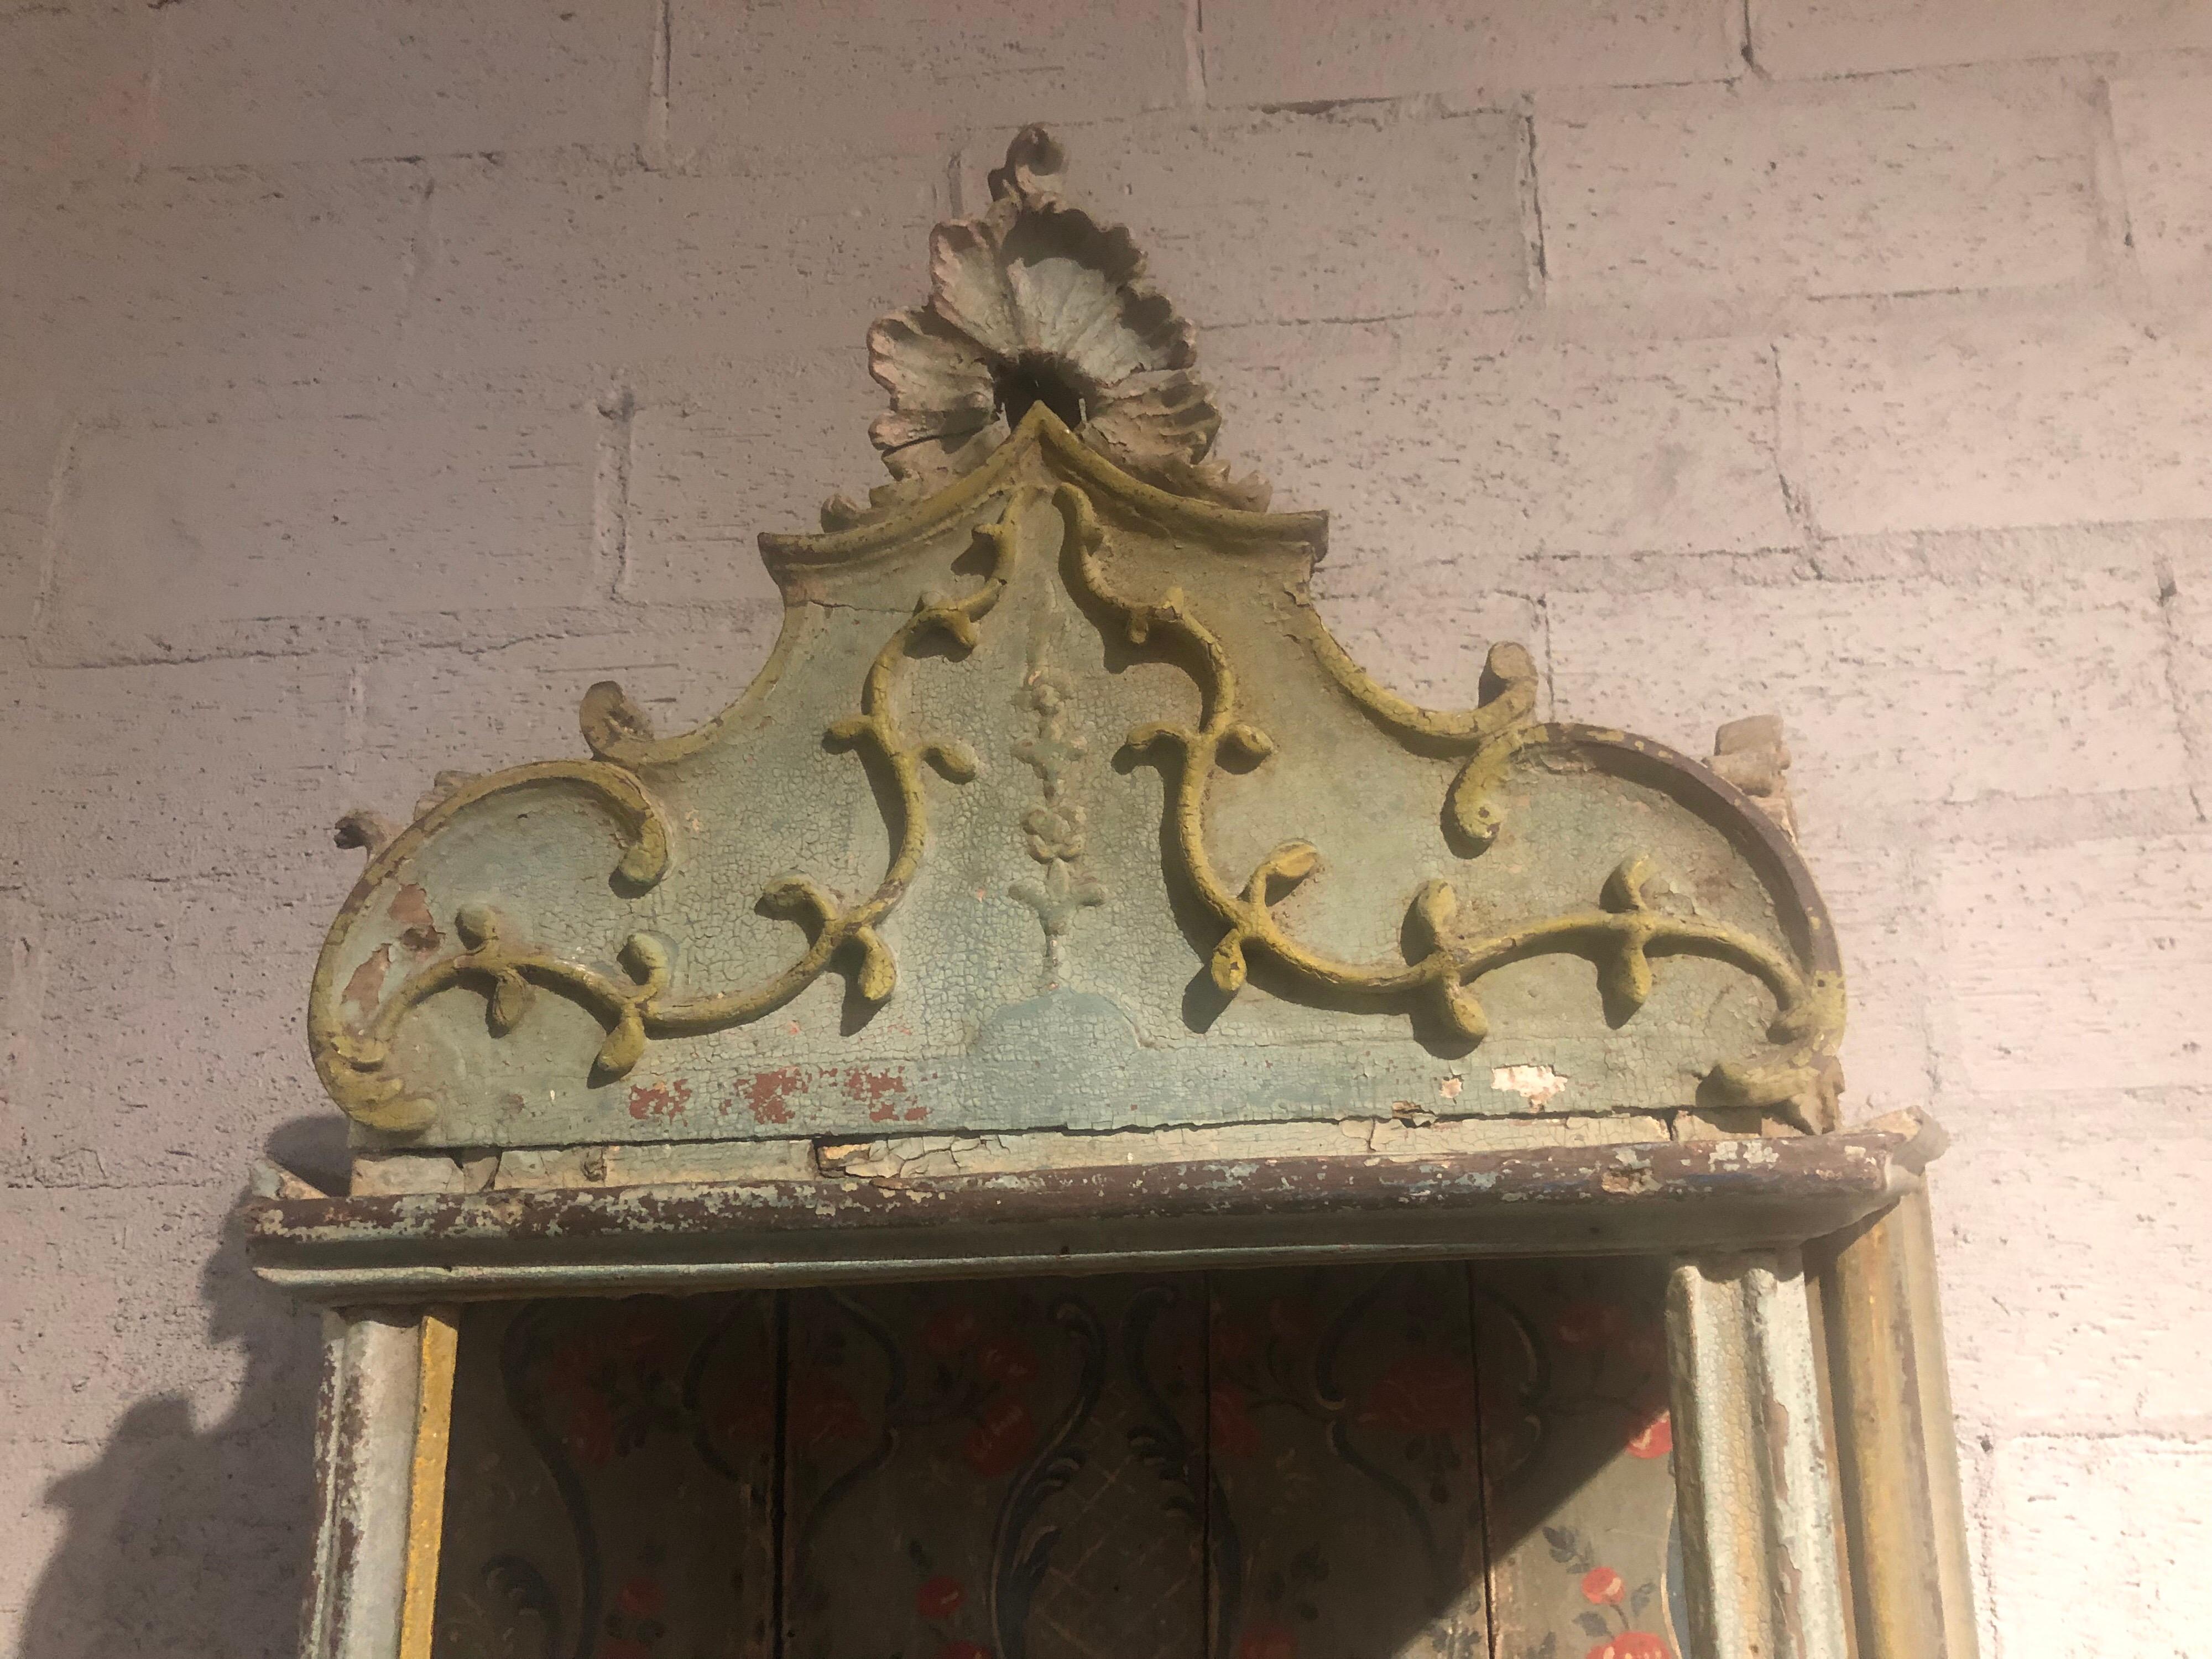 Beautiful 18th century Italian carved and hand painted wall shelf. Painted with a design of leaves, flowers and scrolls. A very unique piece!